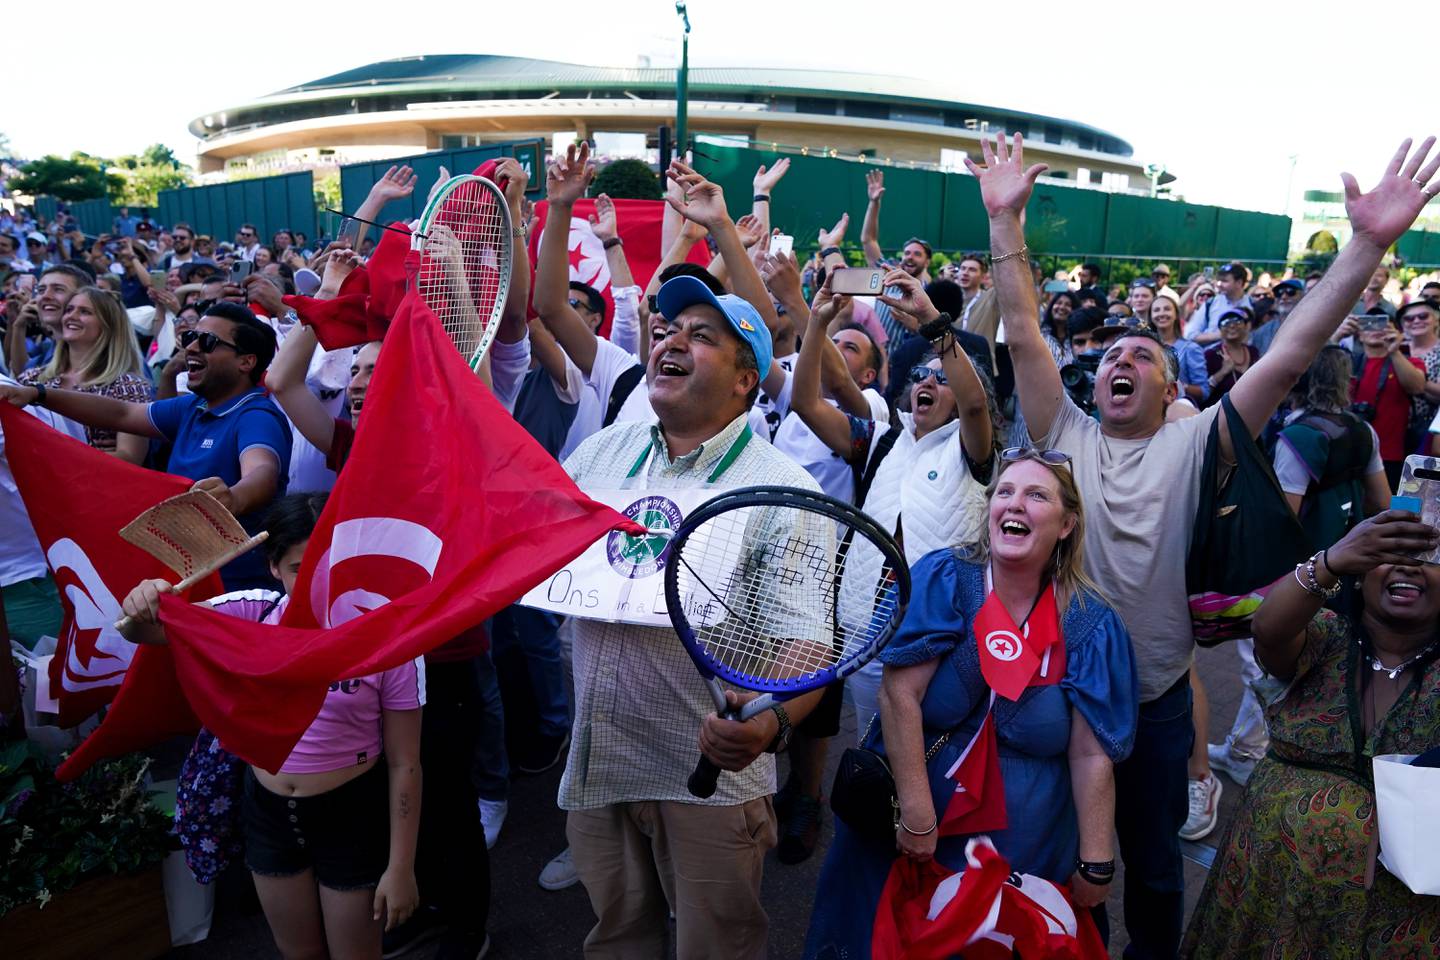 Ons Jabeur's Tunisian supporters at the All England Club. PA